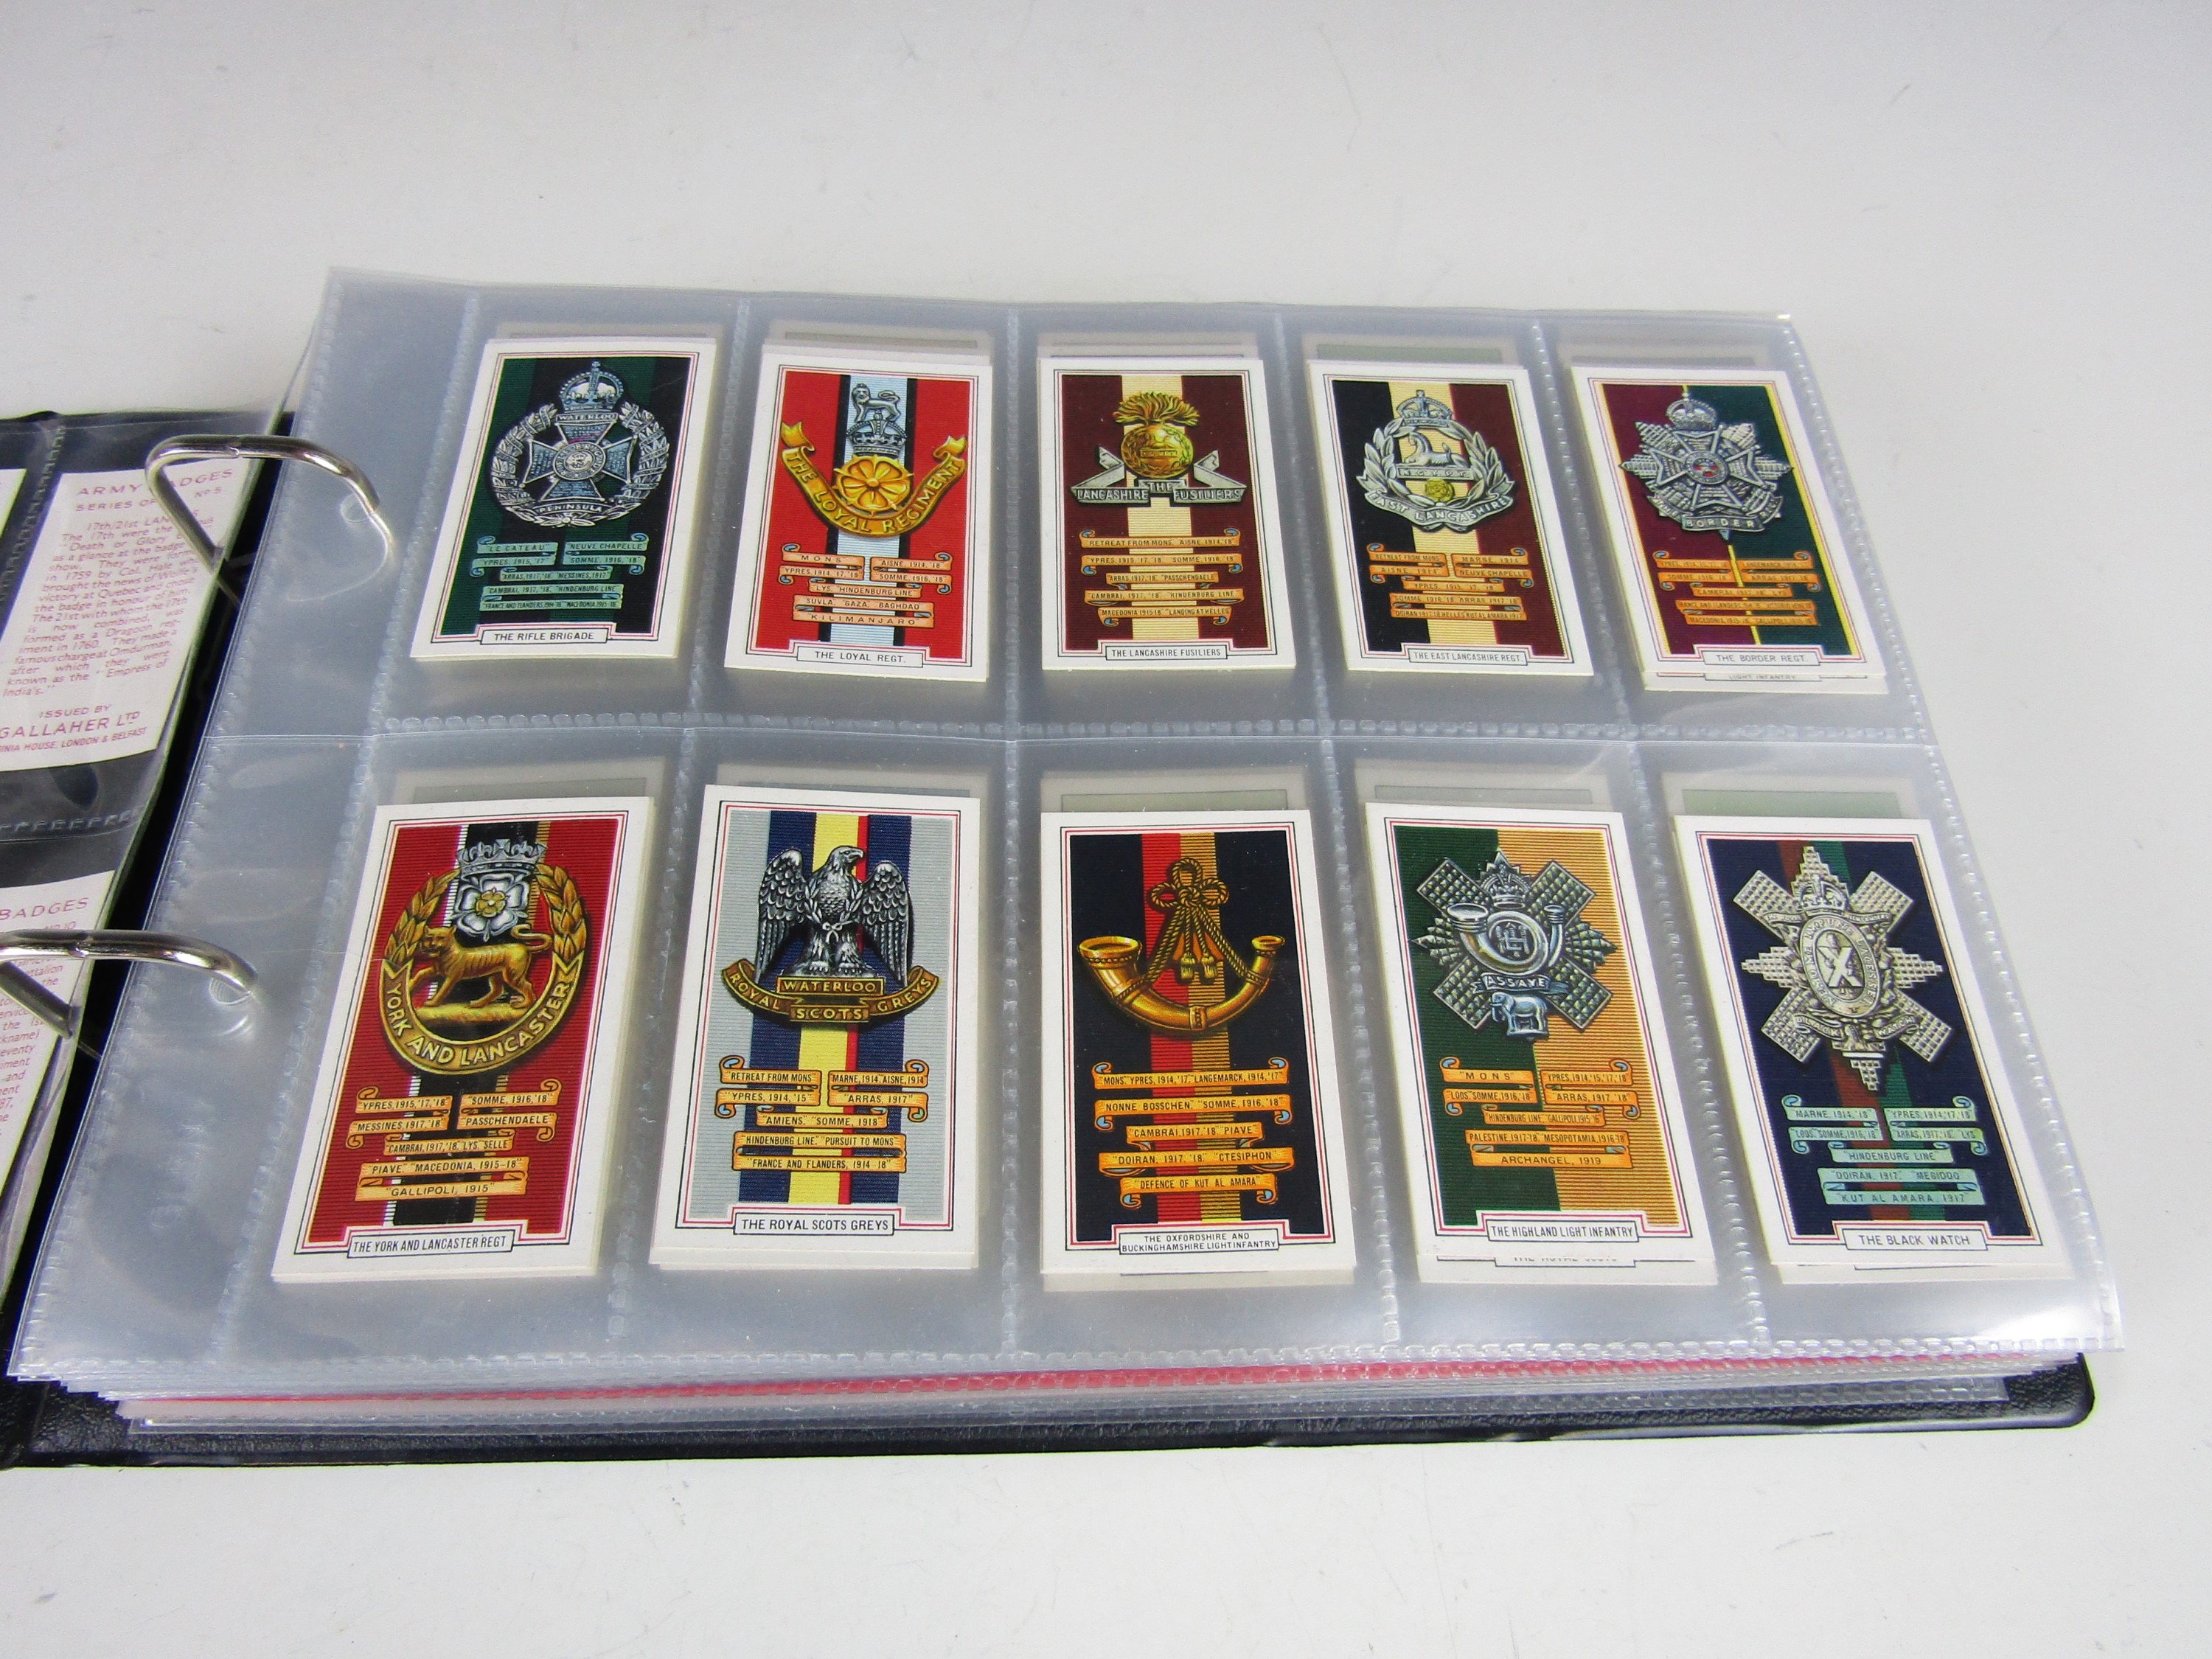 An album of vintage cigarette card series including Gallahers Army Badges, Wild Flowers, Butterflies